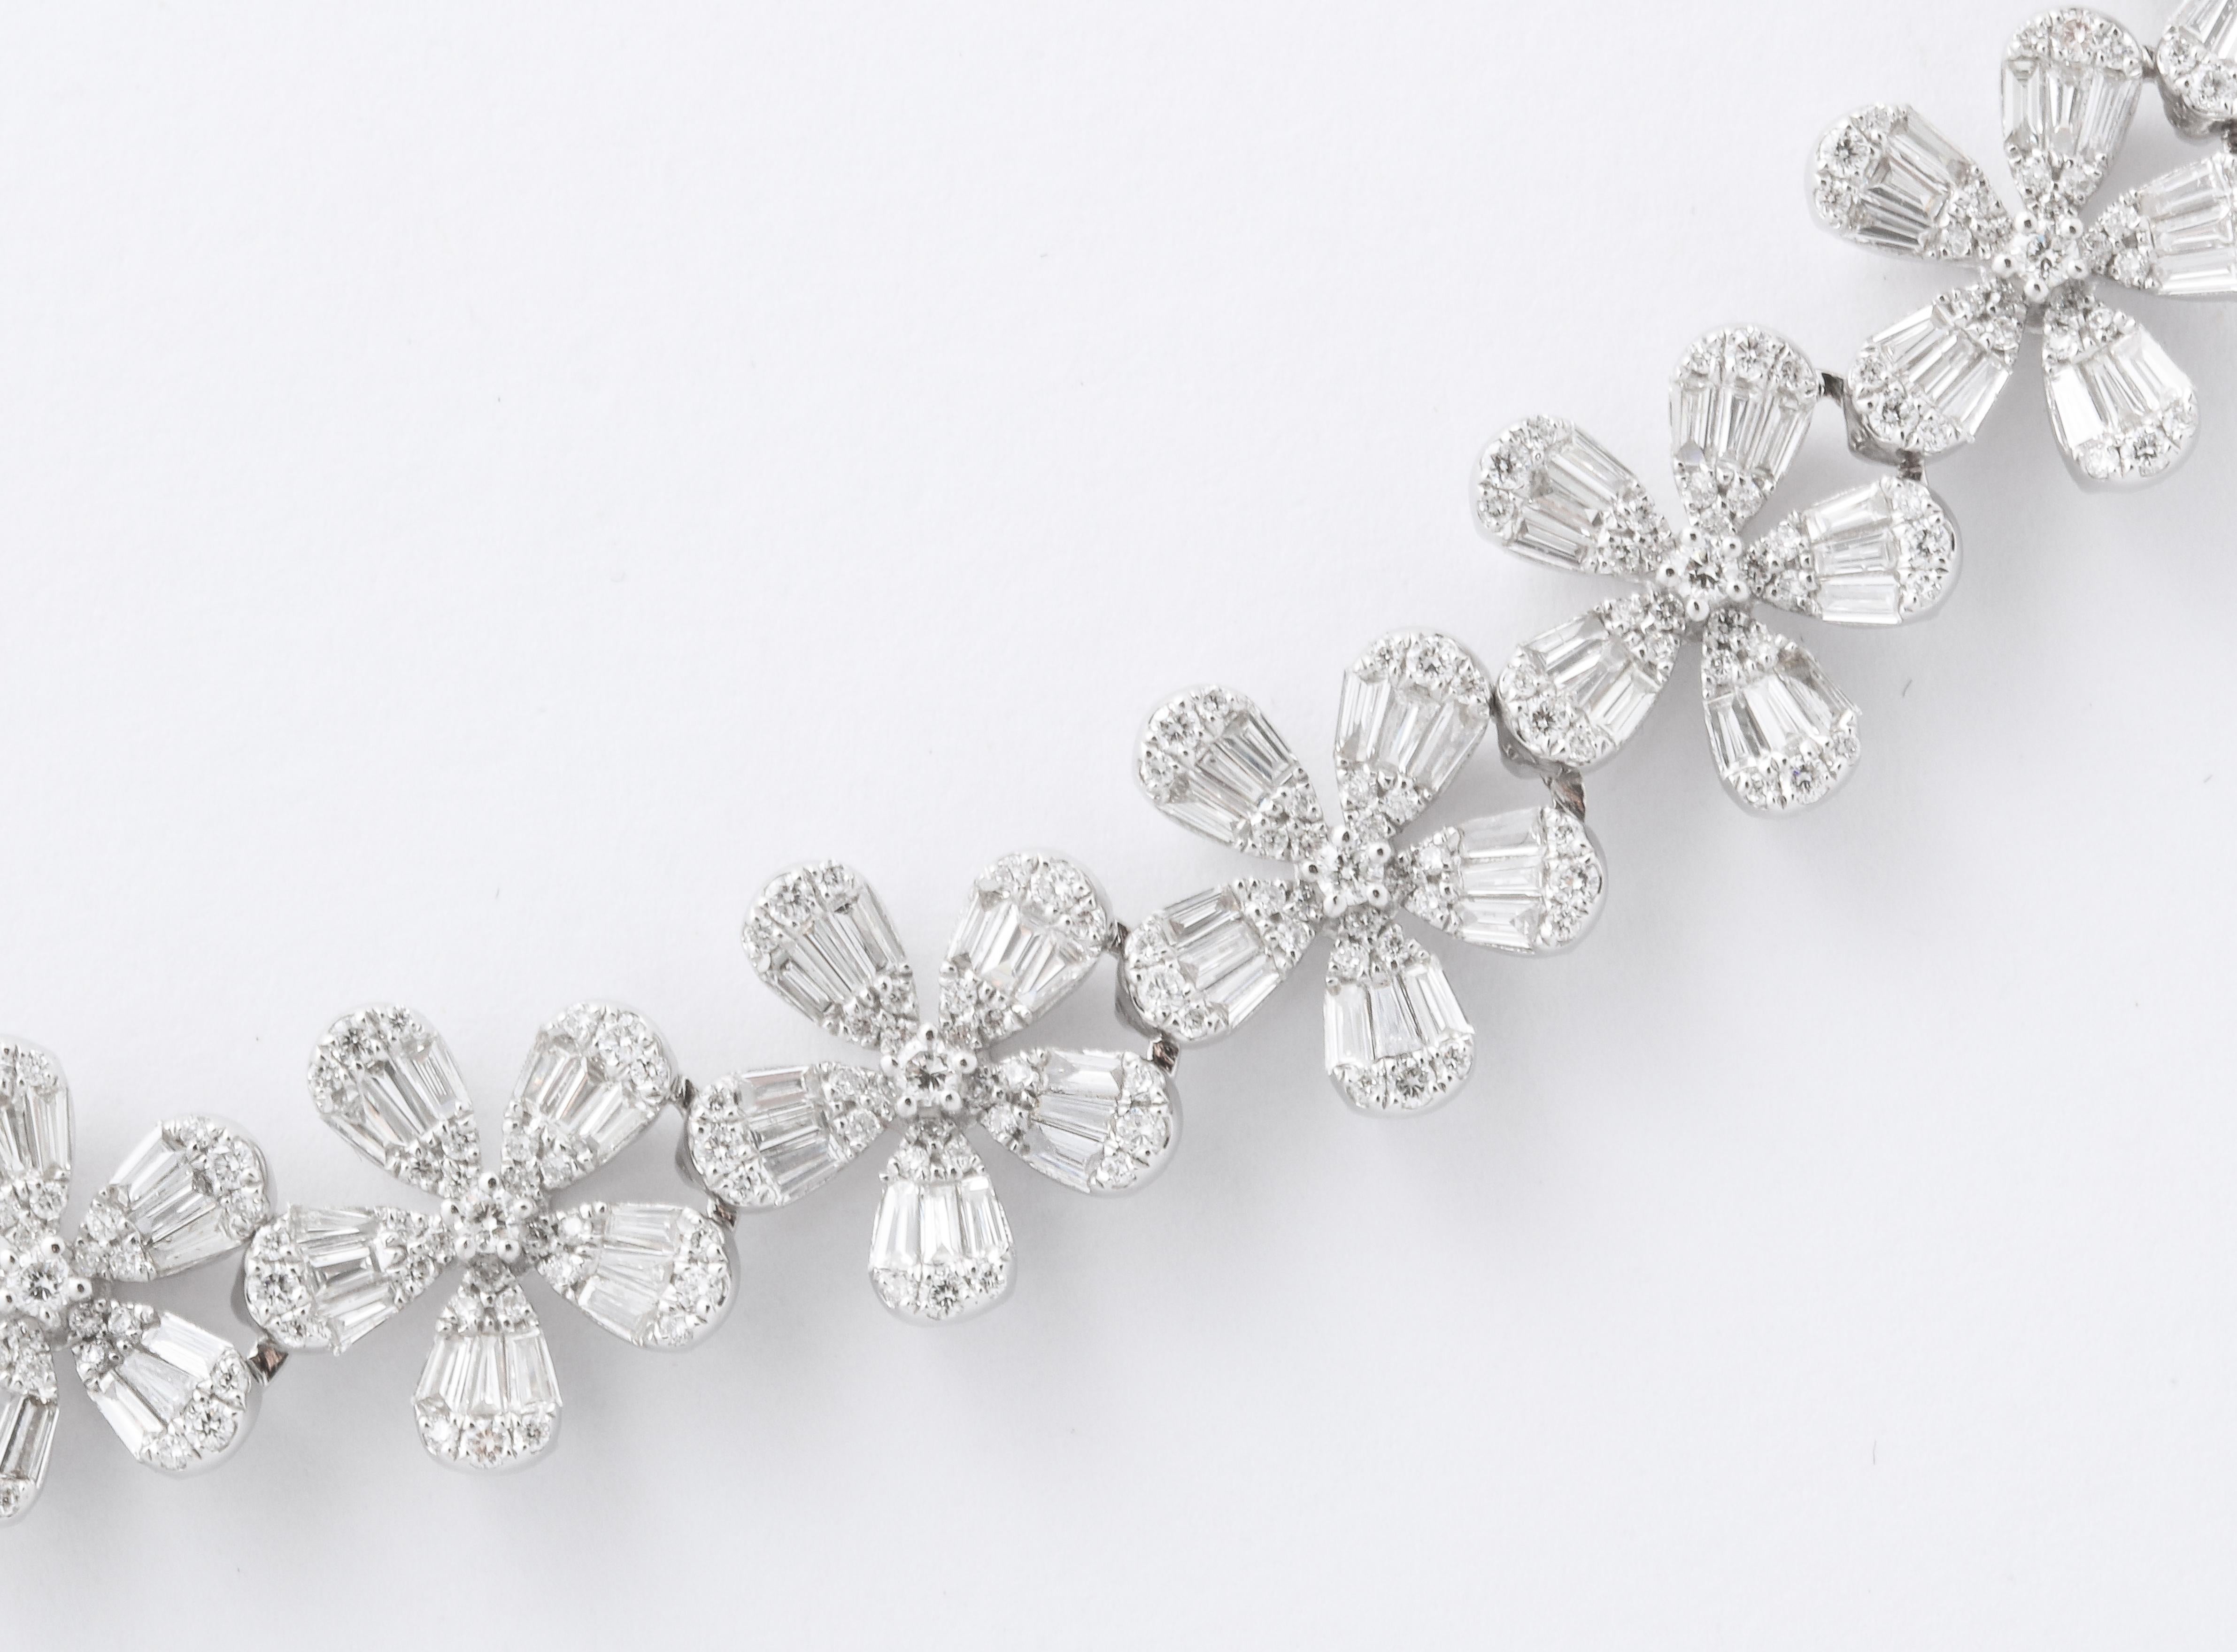 
A classic wreath necklace, full of sparkle!

14.54 carats of white round brilliant cut and baguette cut diamonds set in flower shapes. 

18k white gold

.45 inches wide -- 17 inch length

A fantastic looking piece!